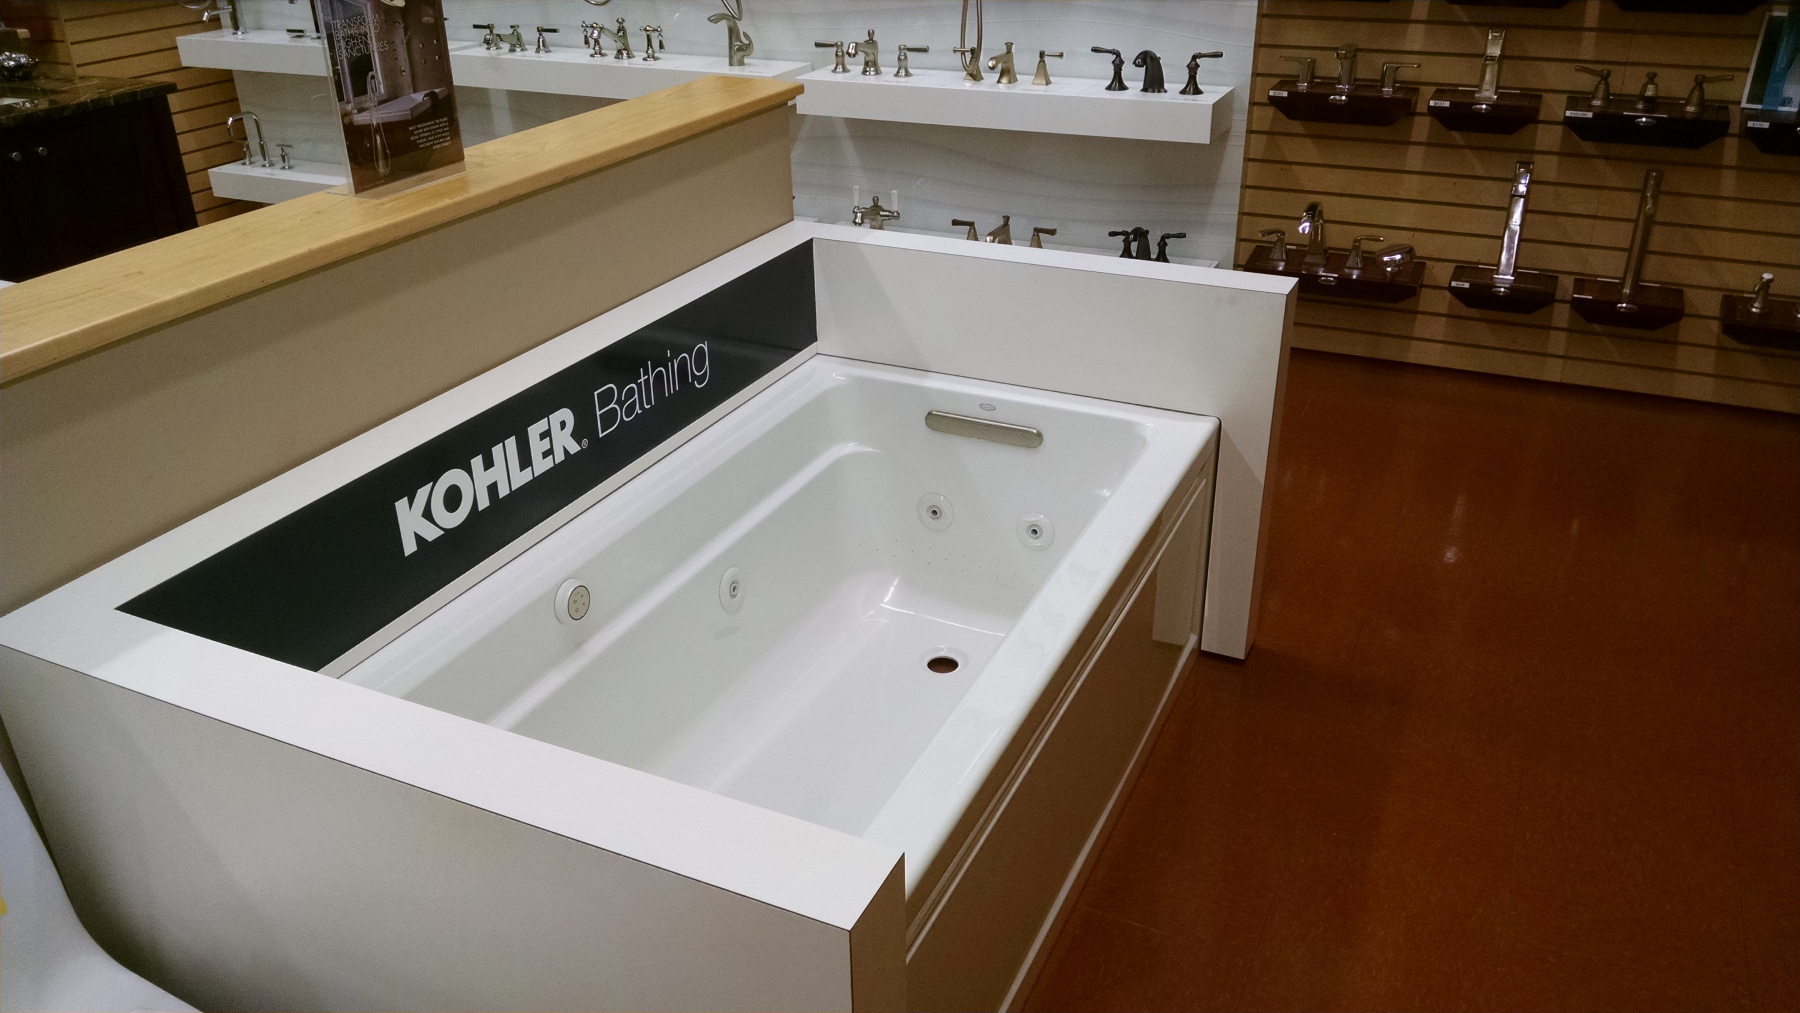 Nationwide Fixture Installations Inc Kohler Case Study New Store Installation Retail Rollouts Shop-in-Shop Program Management Signage Custom Installation Services